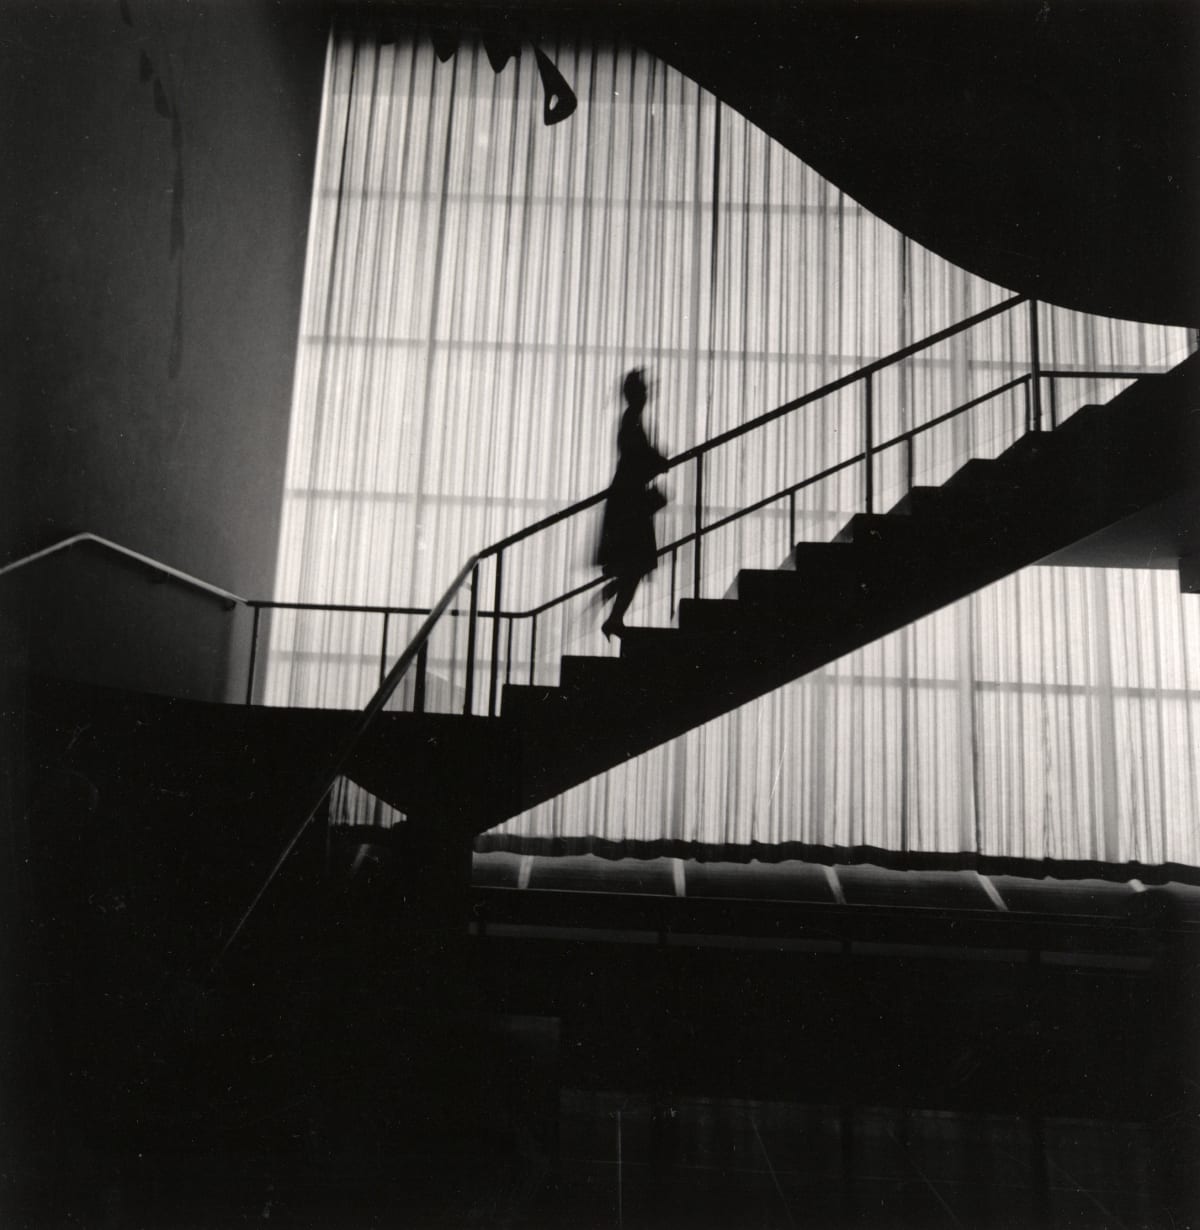 Ray Francis, Woman Ascending Stairs, 1965